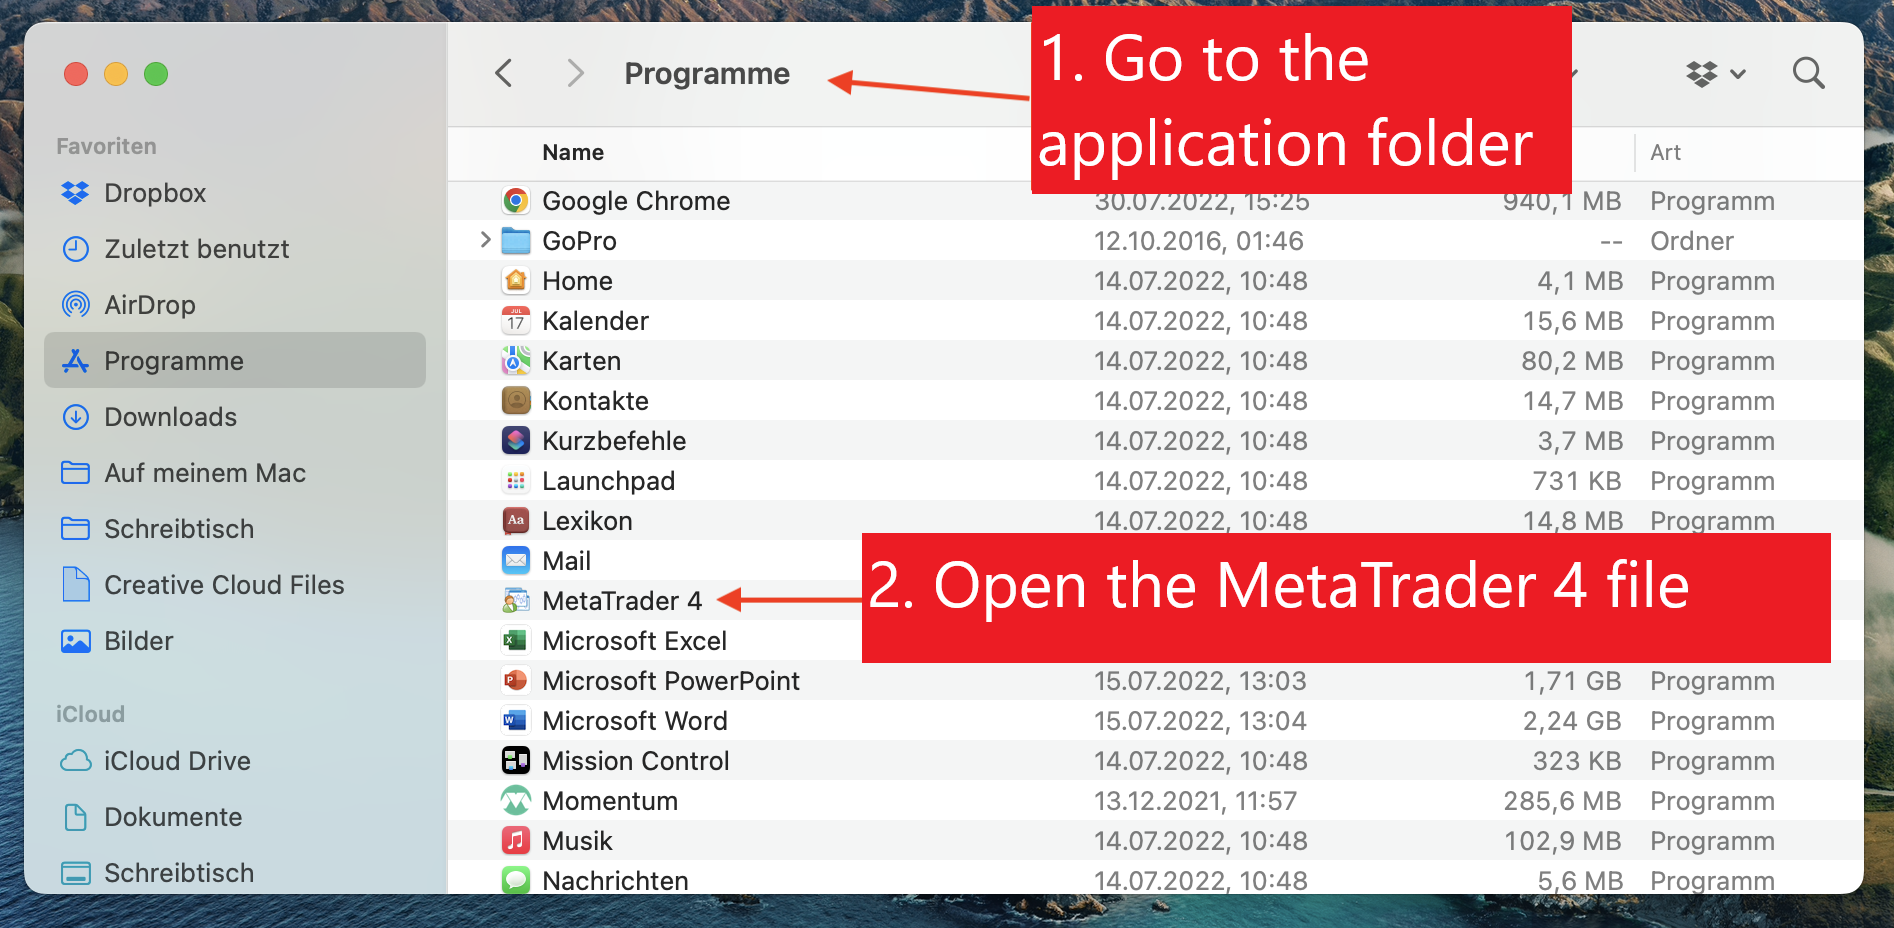 Open the MetaTrader 4 file in the application folder